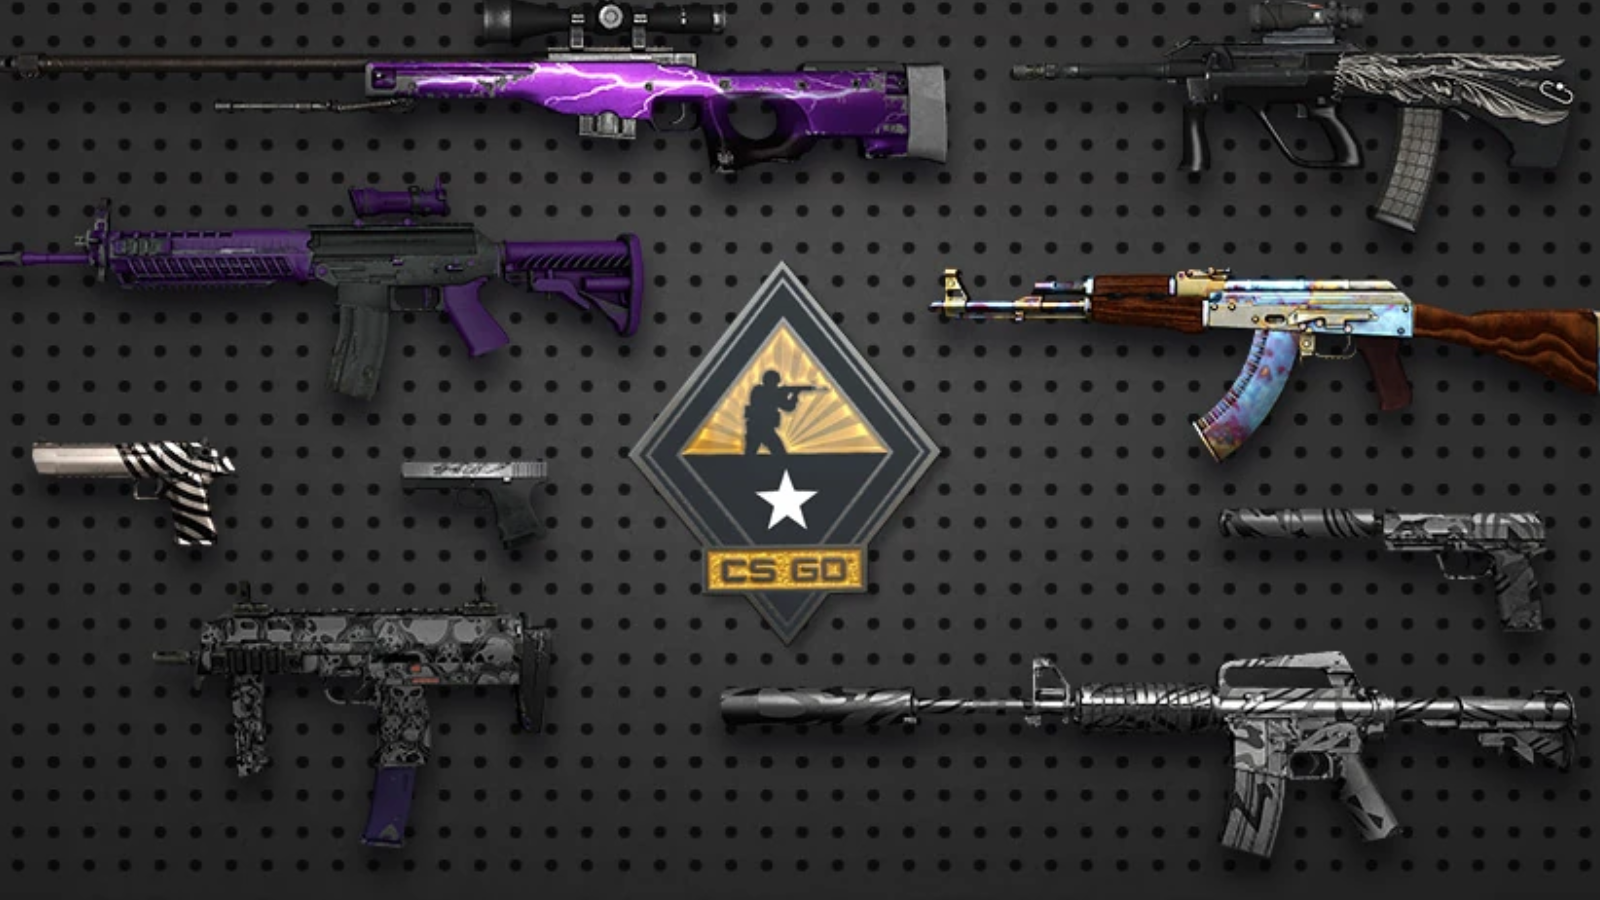 Counter-Strike: Global Offensive, Valve, PC gaming, colorful, gun, weapon  HD Wallpaper